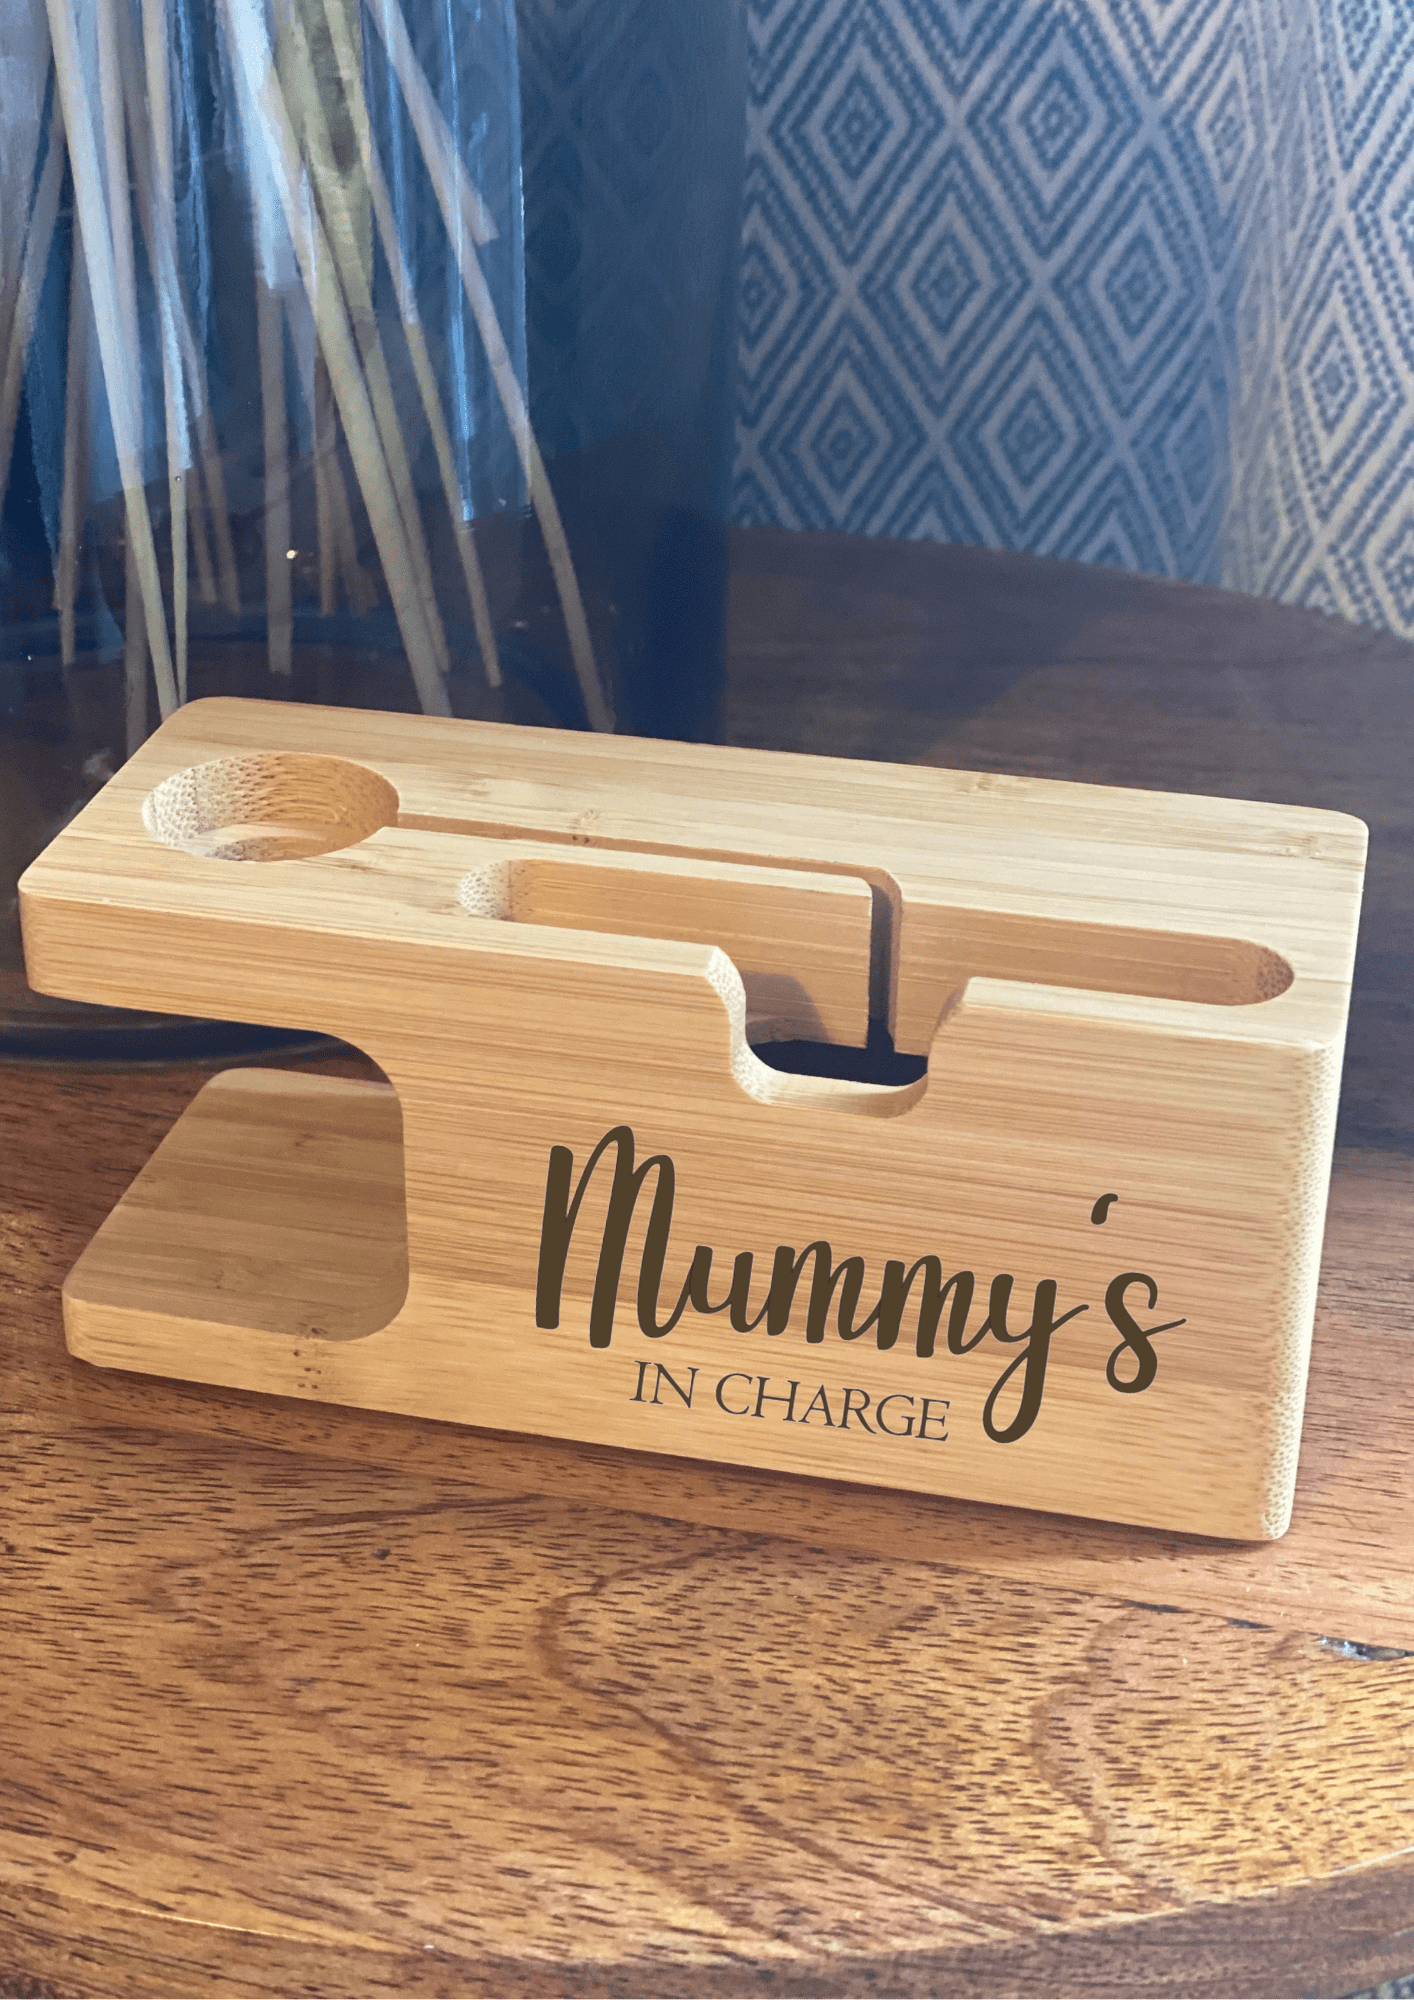 Lua Nova Charging Stations Mummy's in Charge - Apple Watch and Mobile Docking Station